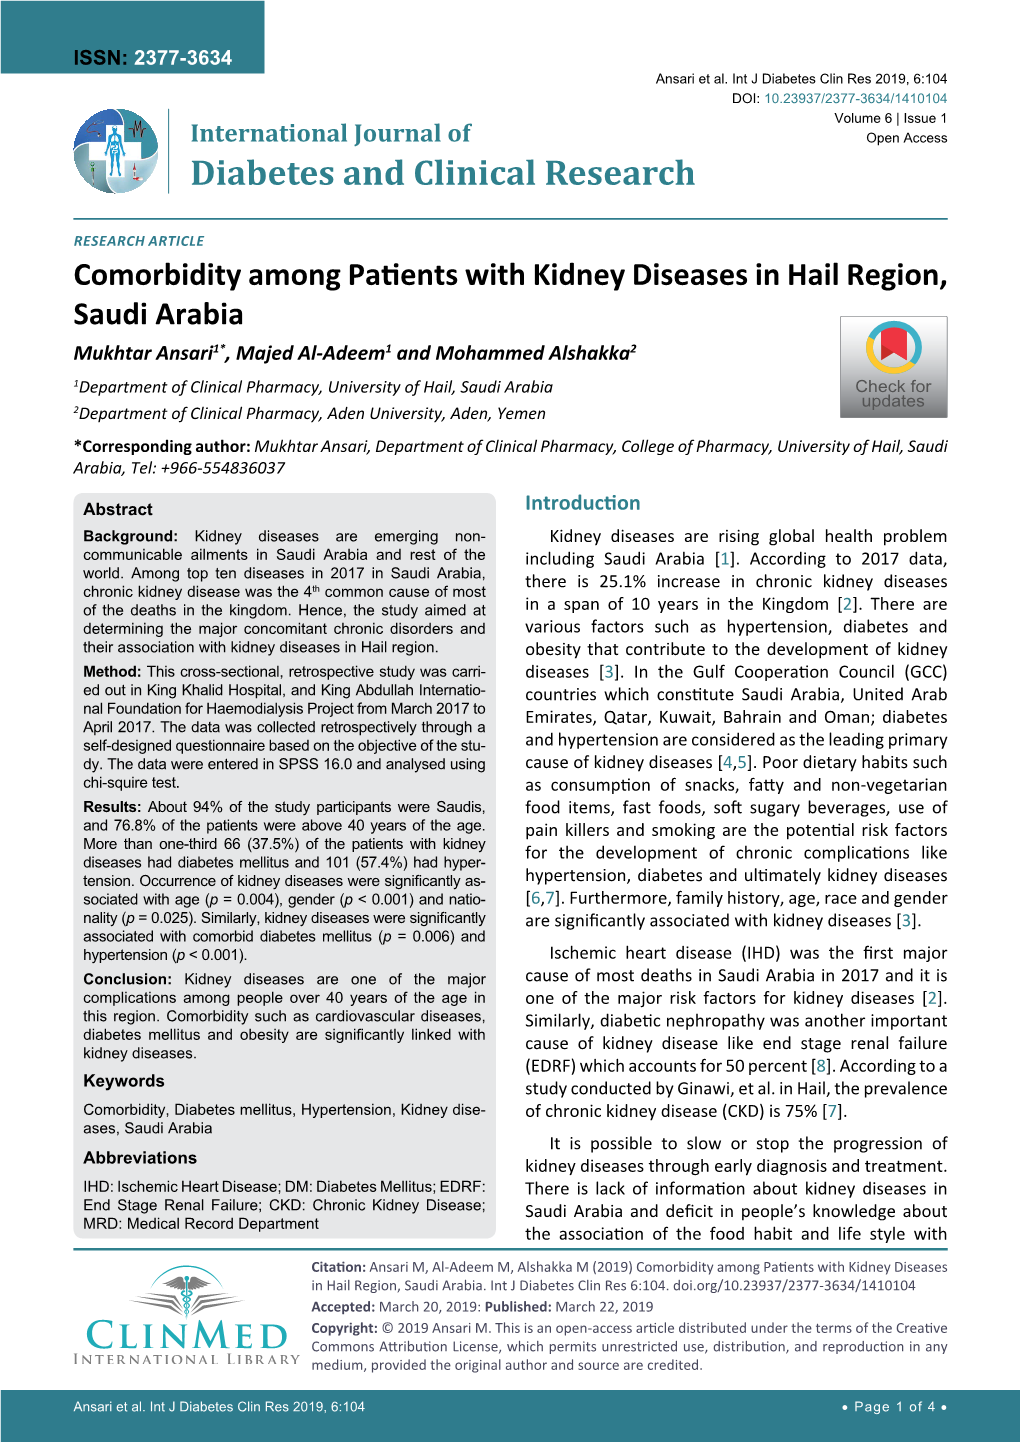 Comorbidity Among Patients with Kidney Diseases in Hail Region